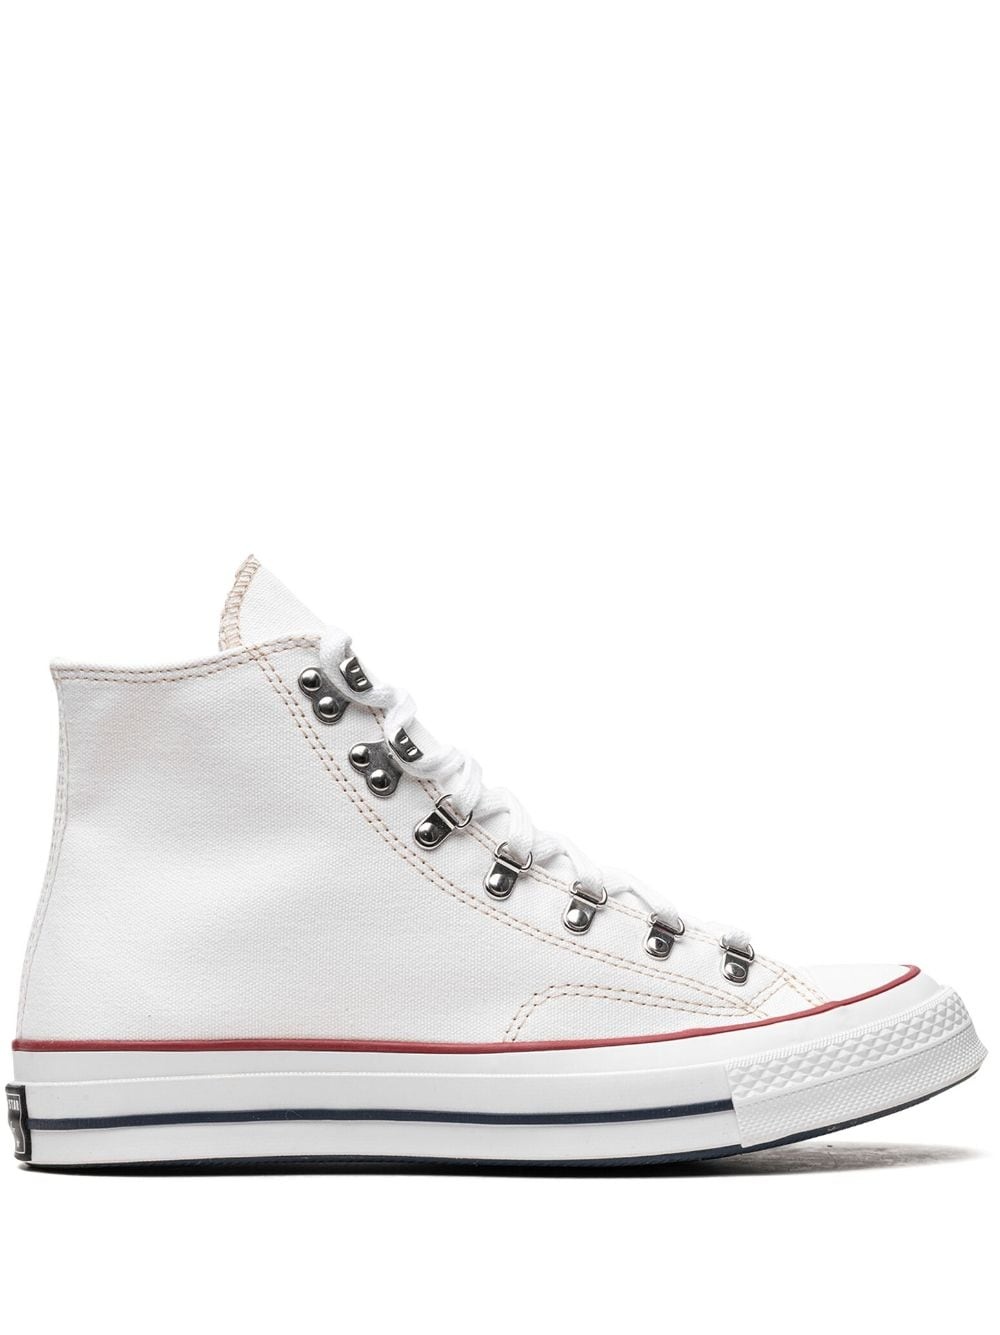 Chuck Taylor All-Star 70 Hi "pgLang White" sneakers - 1